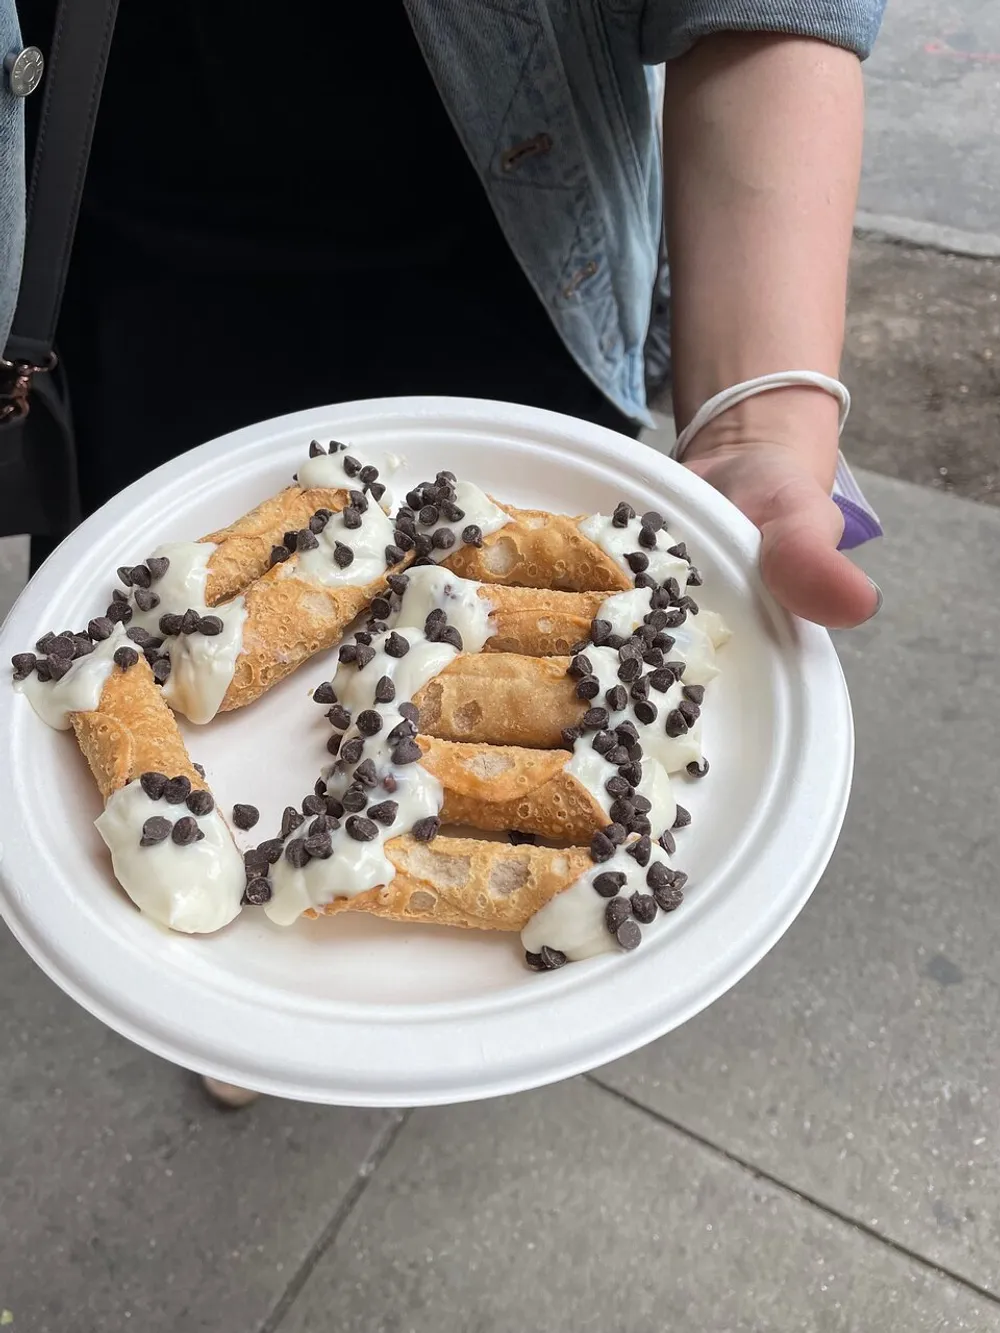 A person is holding a plate of four cannoli topped with cream and sprinkled with chocolate chips